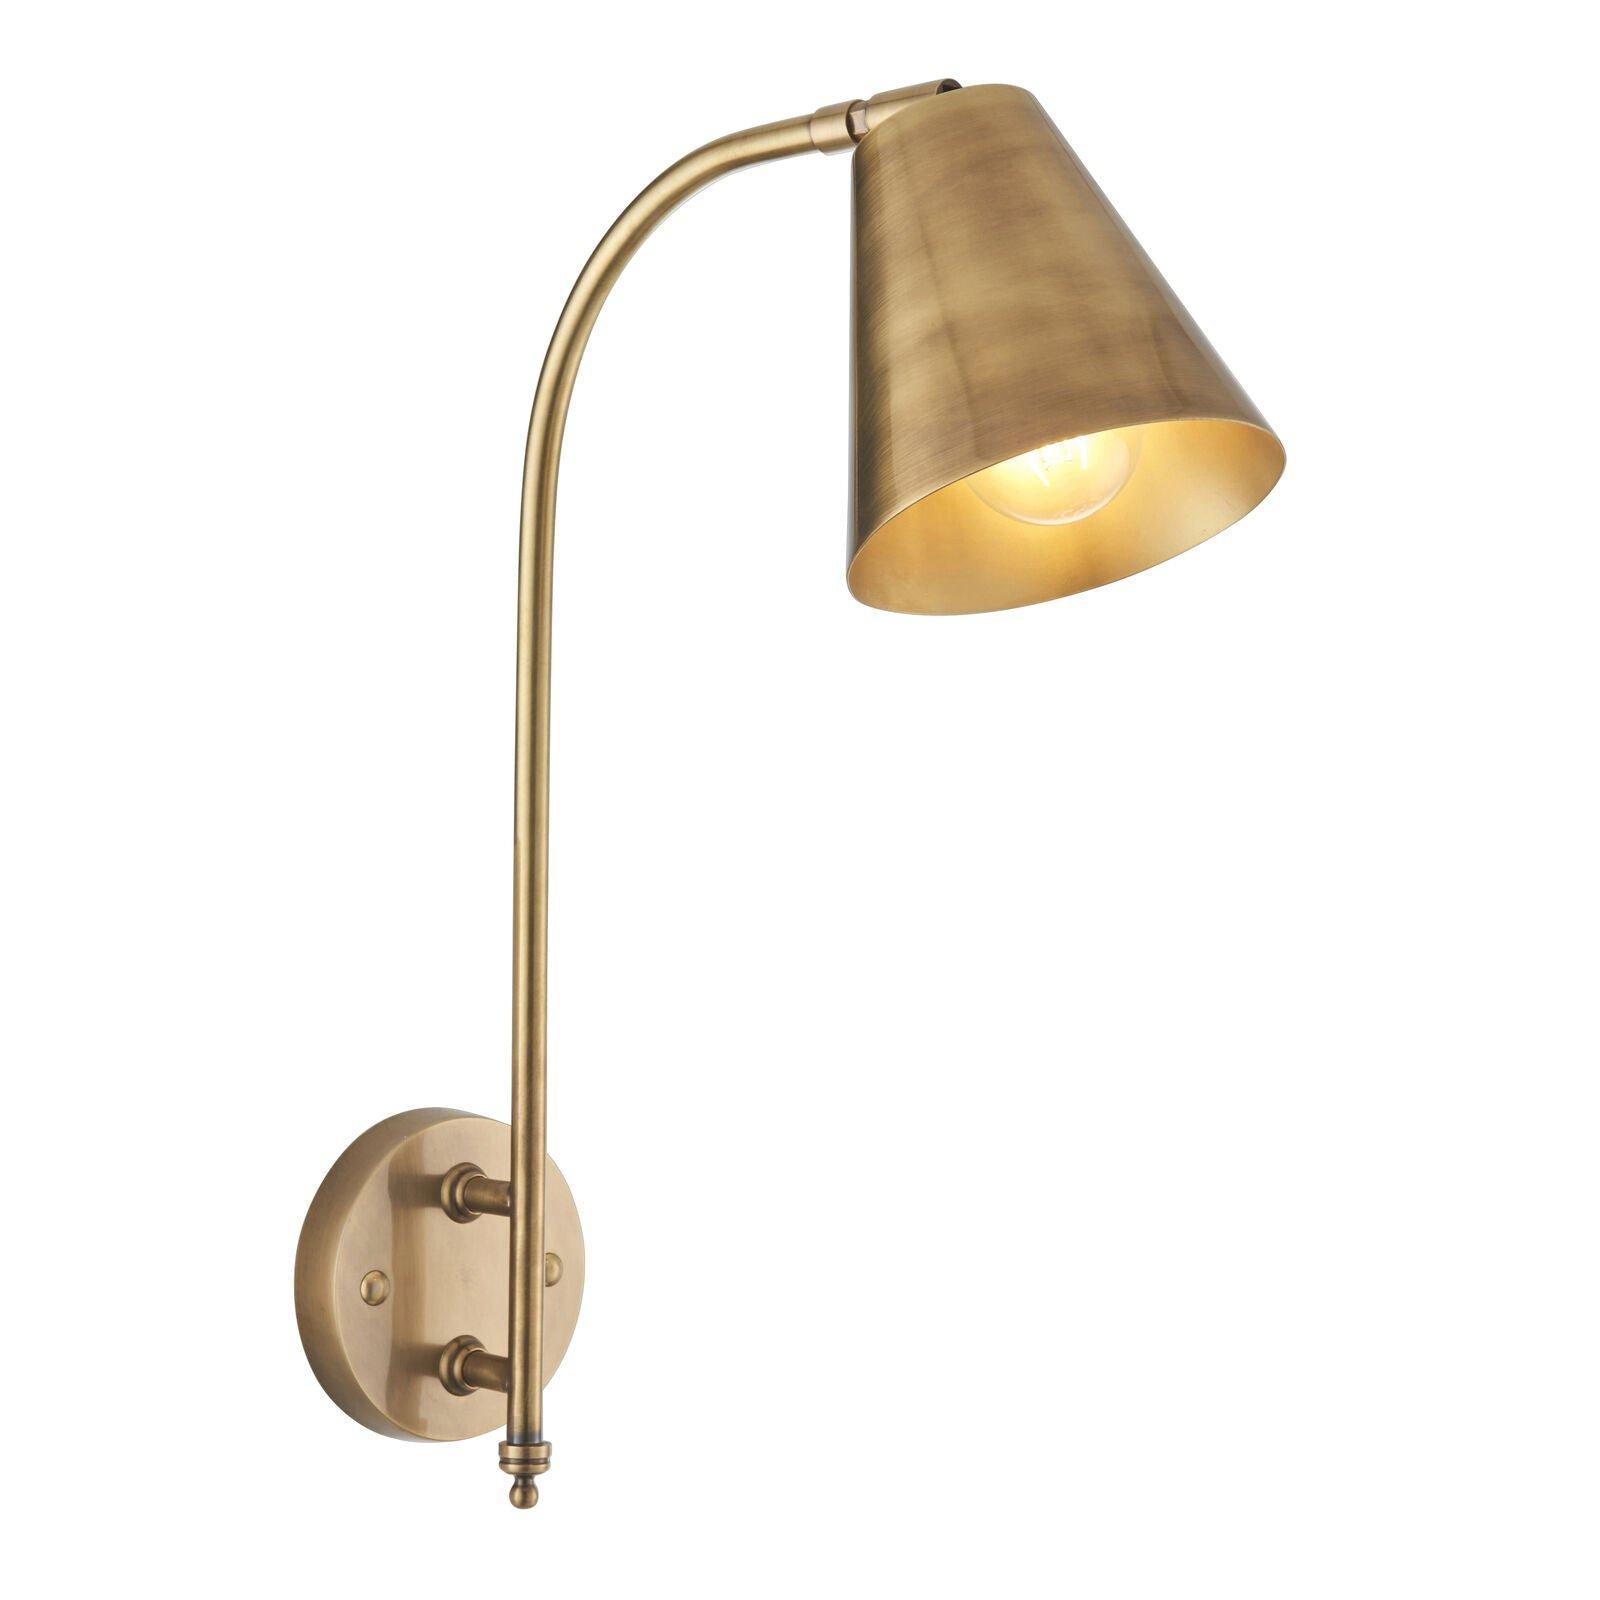 Wall Light - Antique Solid Brass - 10W LED E27 - Dimmable  - Living Room